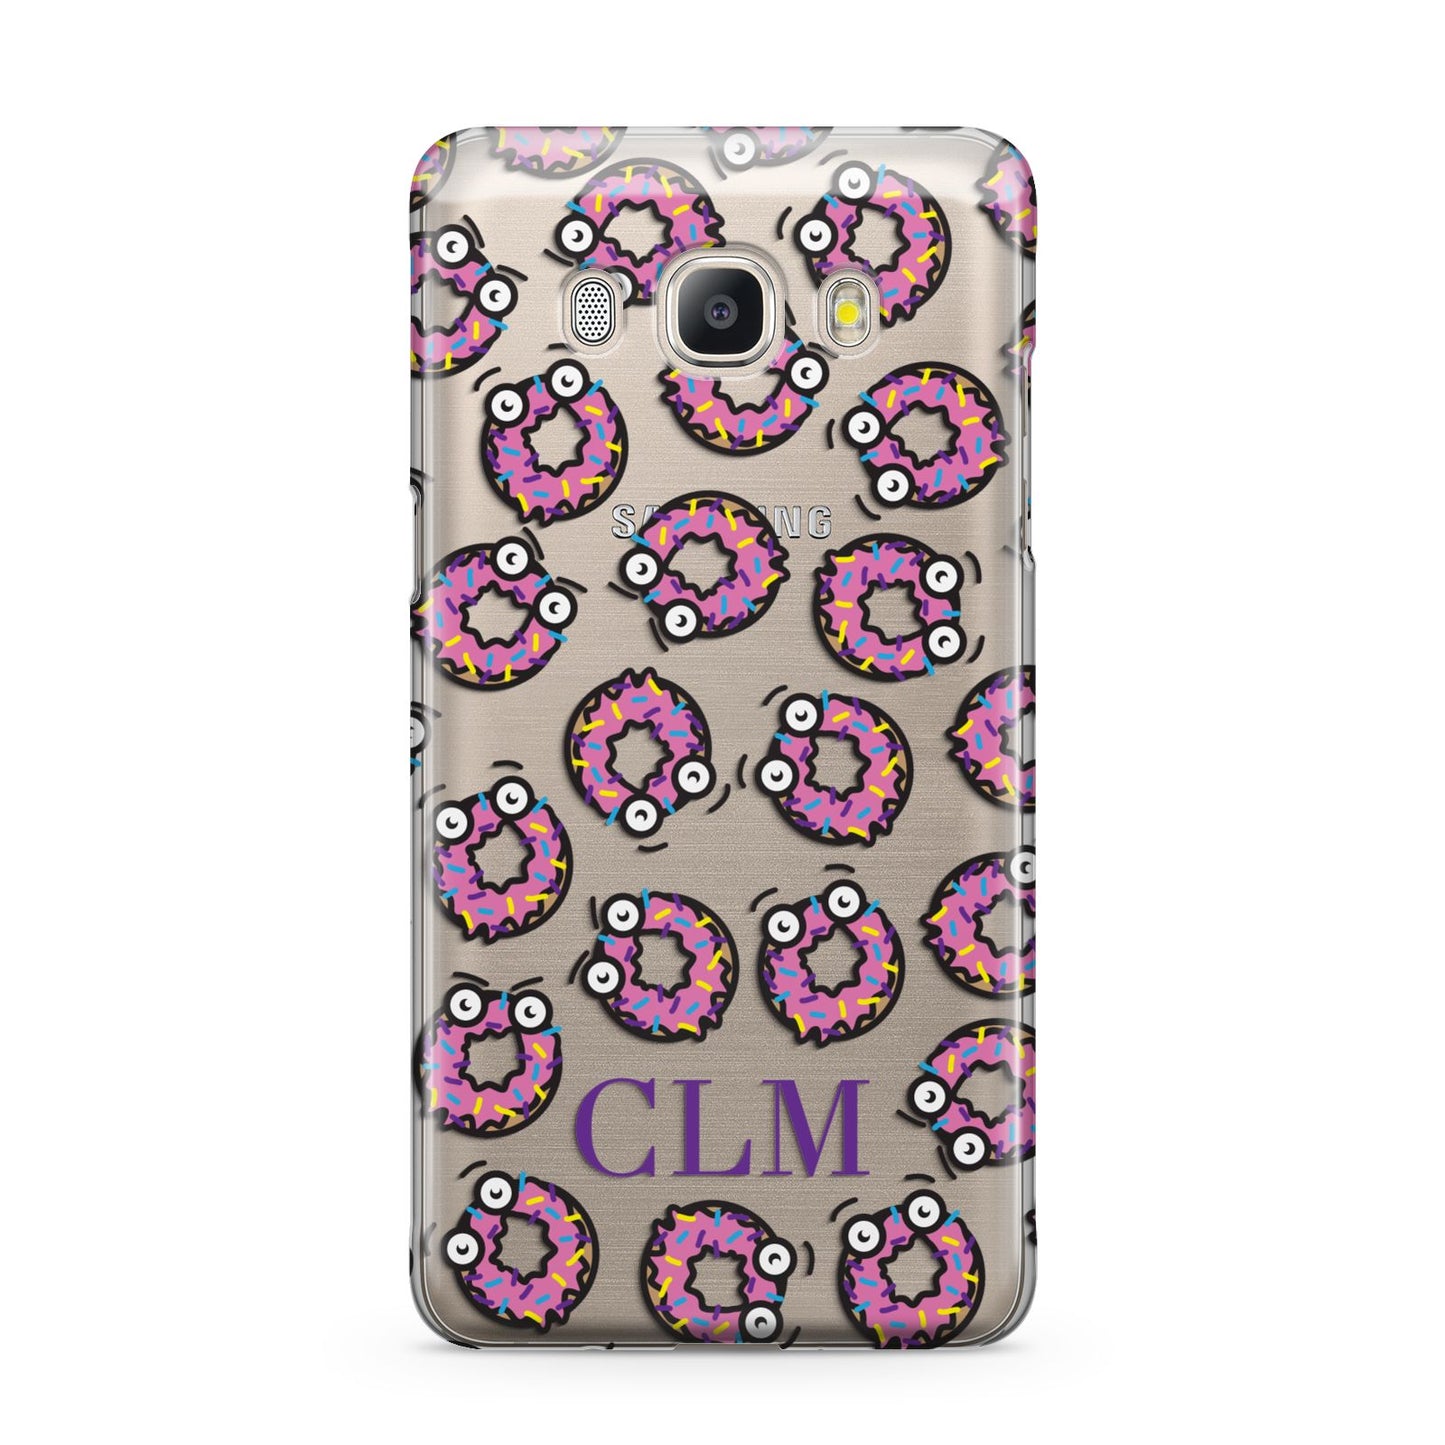 Personalised Donut Initials Samsung Galaxy J5 2016 Case